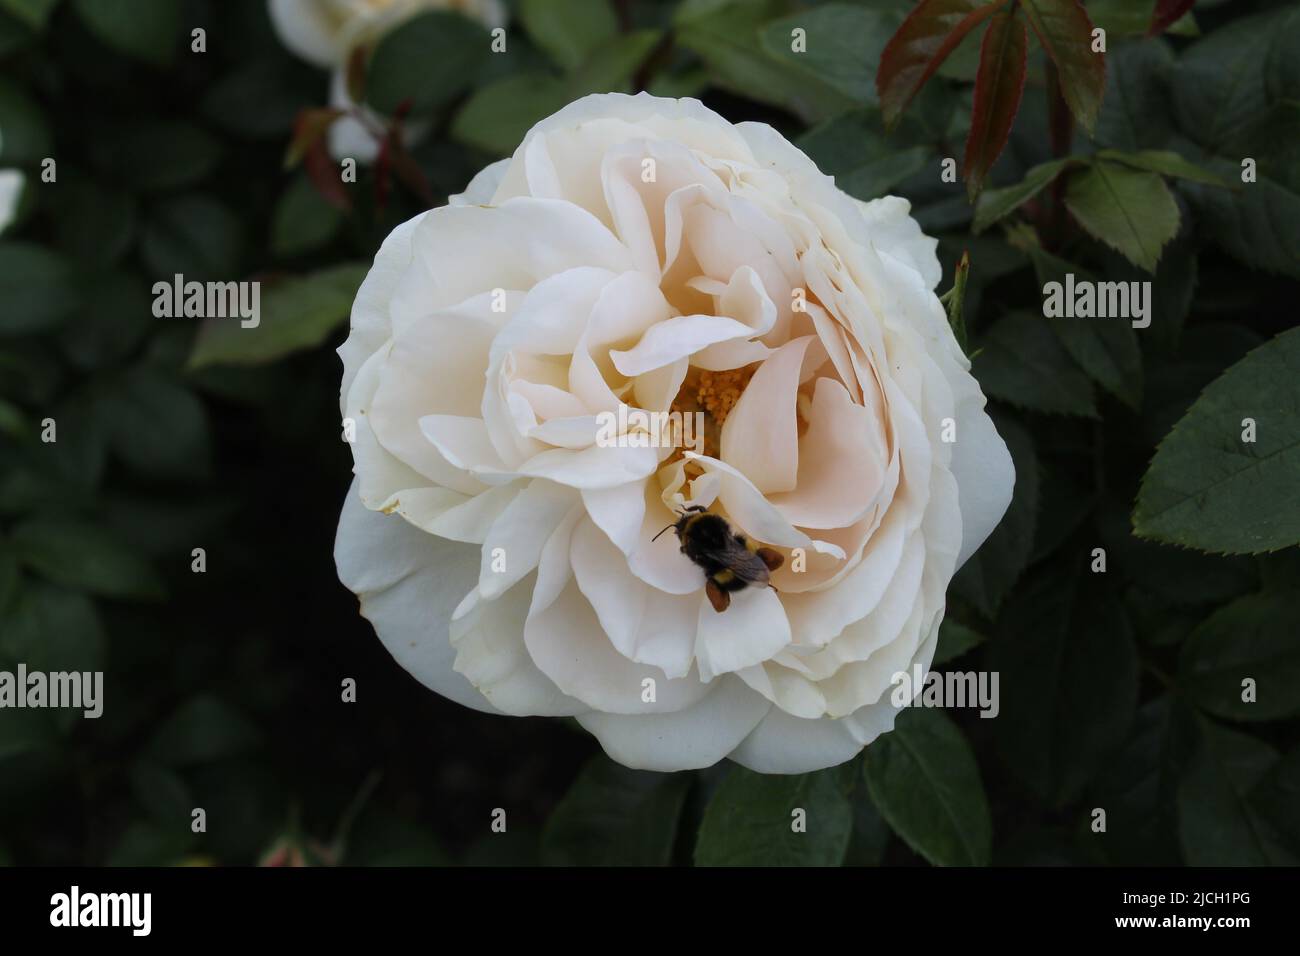 beautiful white rose flower with a bumble bee on it Stock Photo